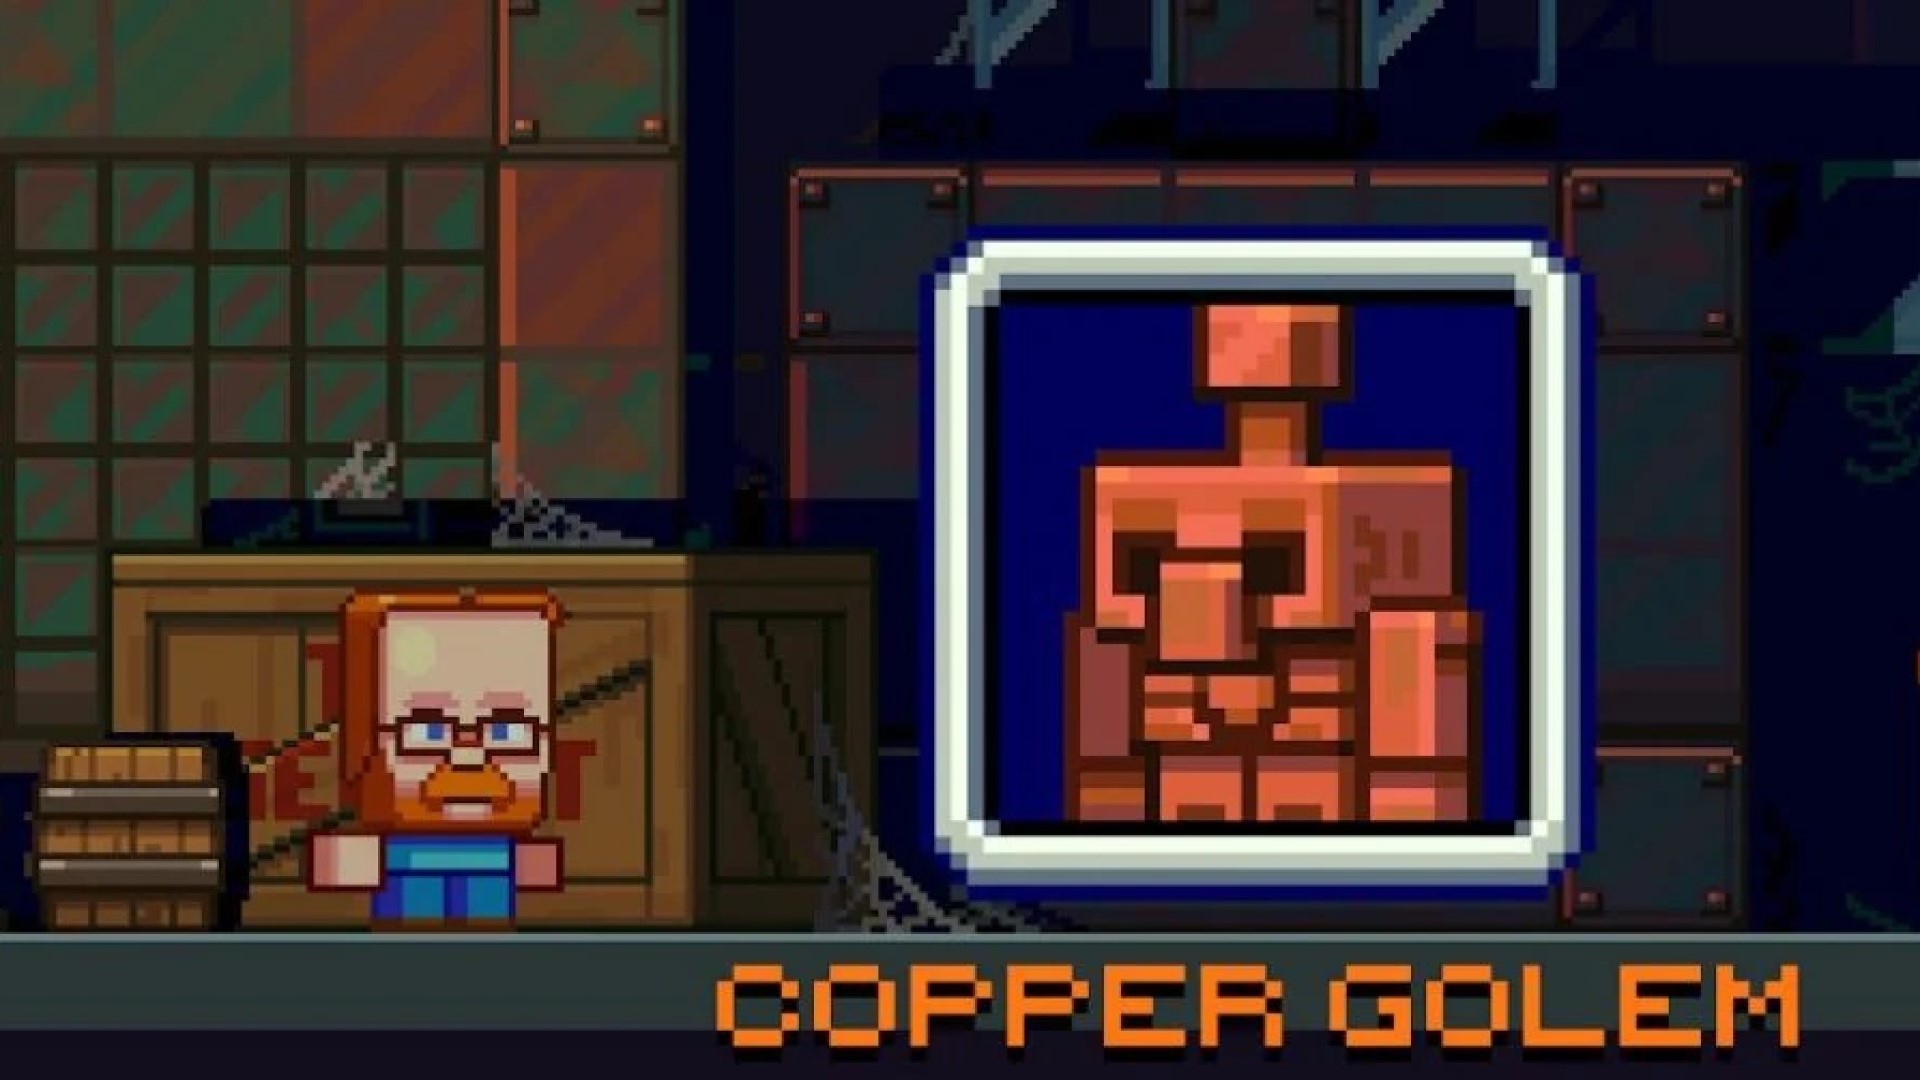 Minecraft's copper golem would be a DIY buddy who loves to press buttons